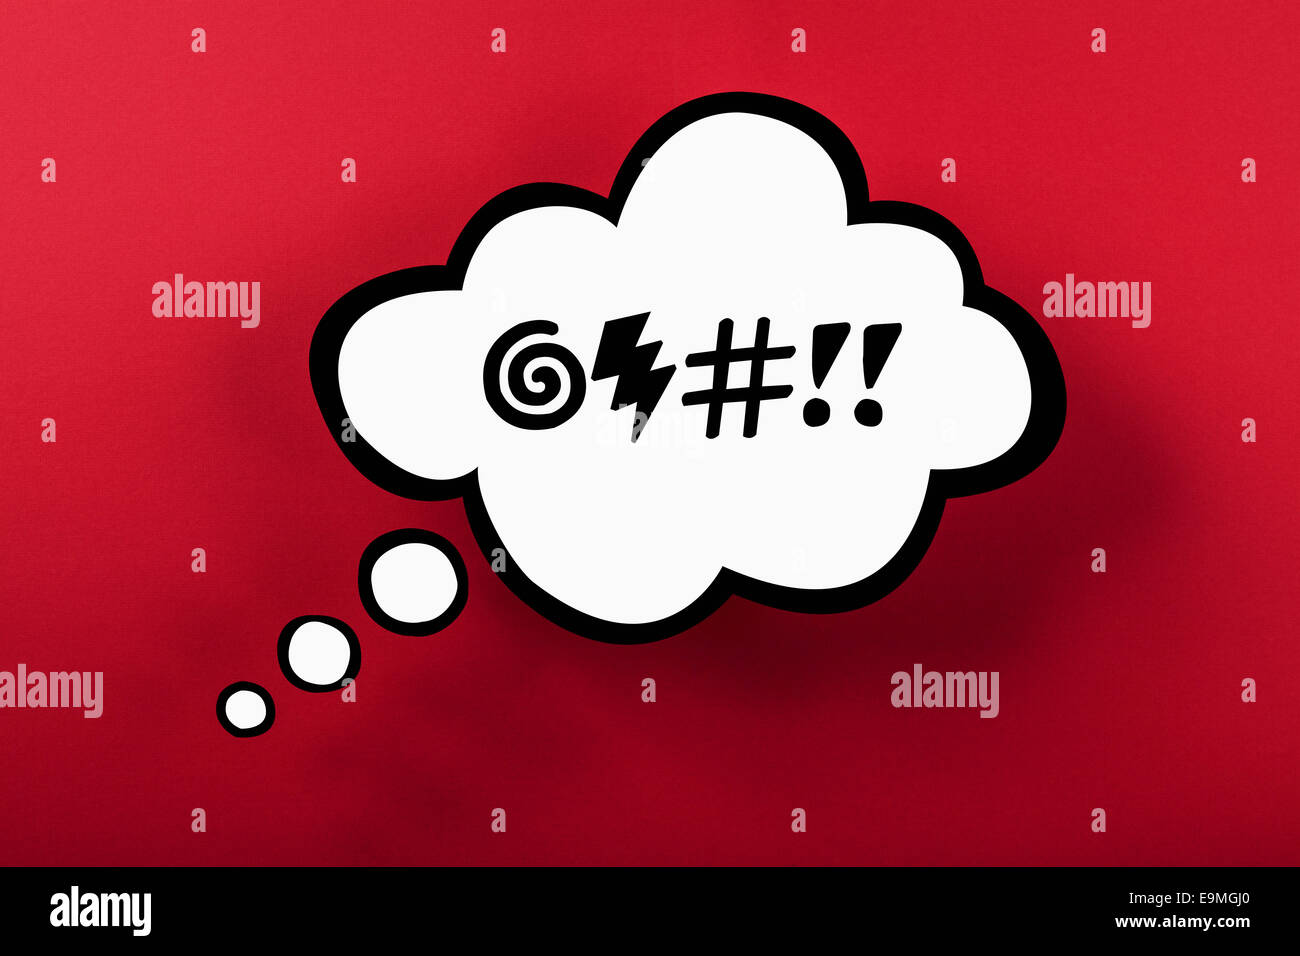 Swear word thought bubble against red background Stock Photo